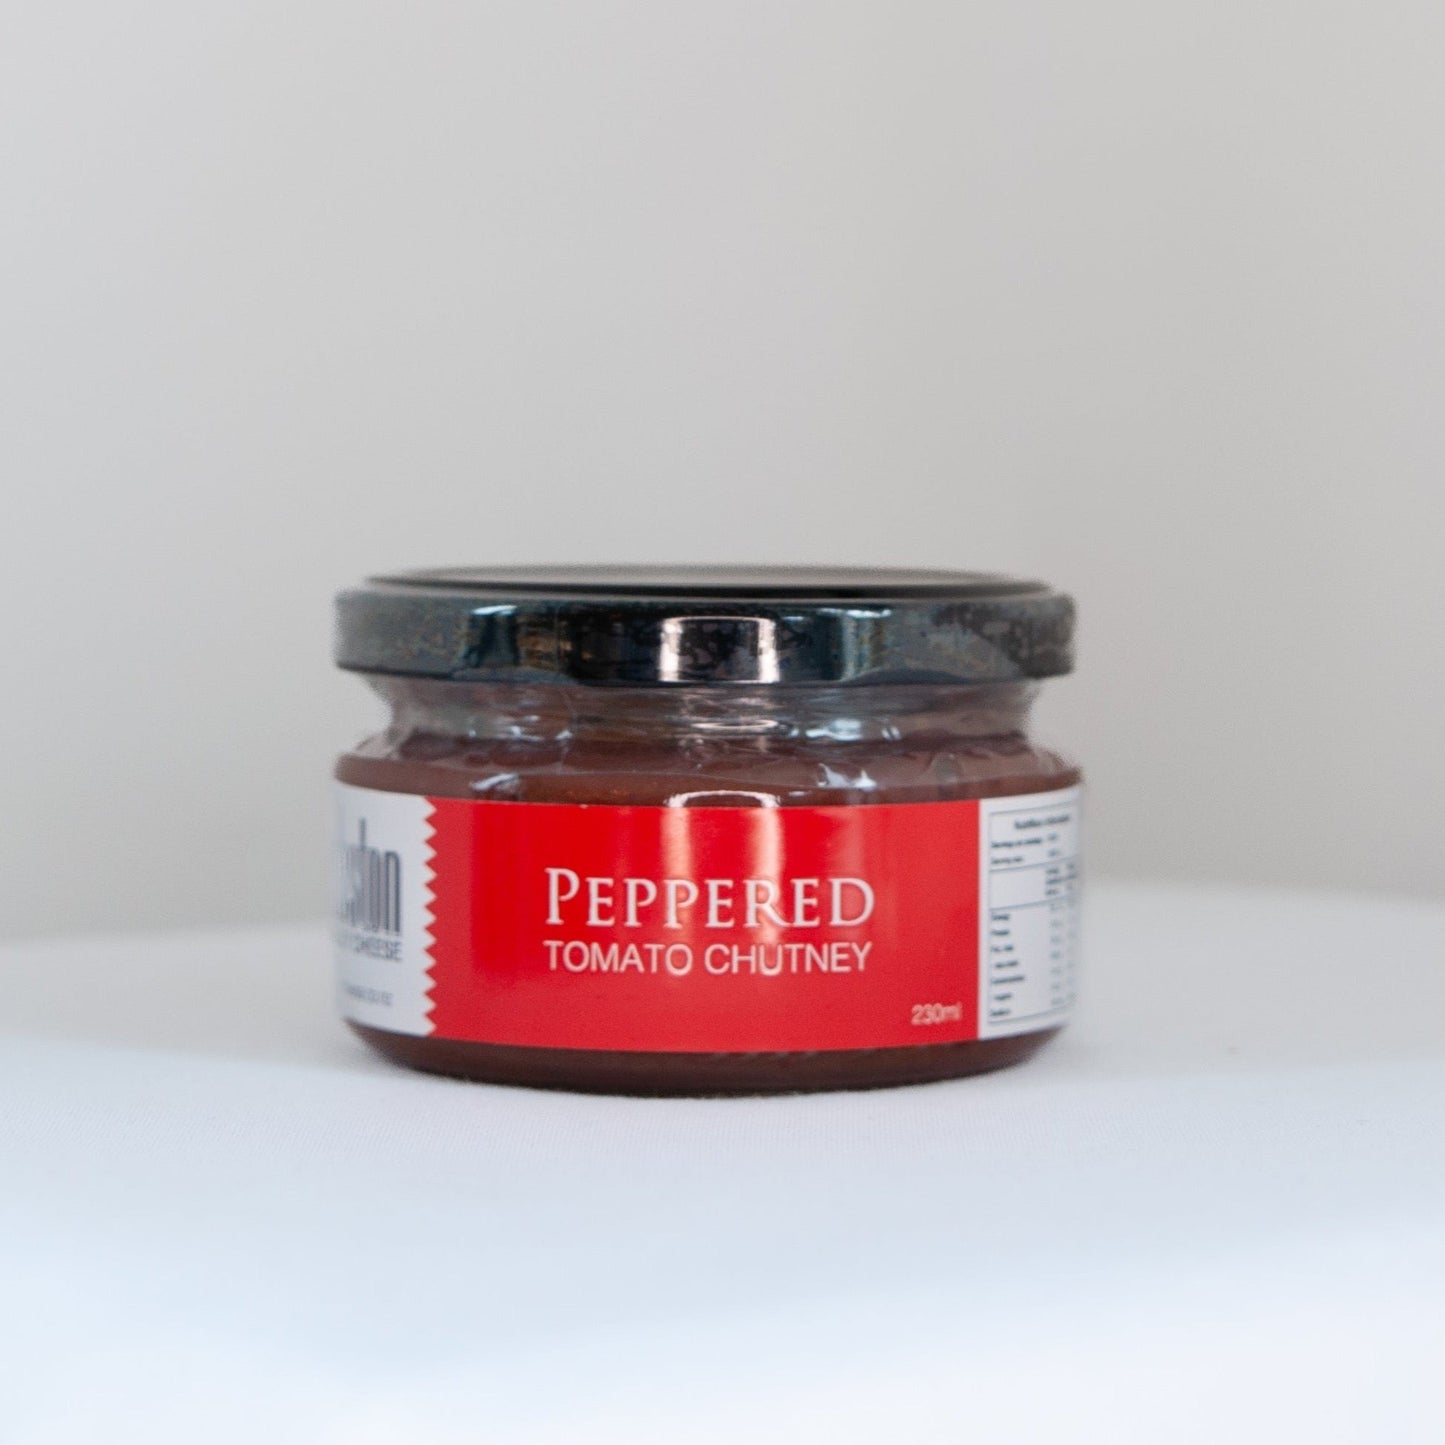 Peppered Tomato Chutney by Gibbston Valley Cheese